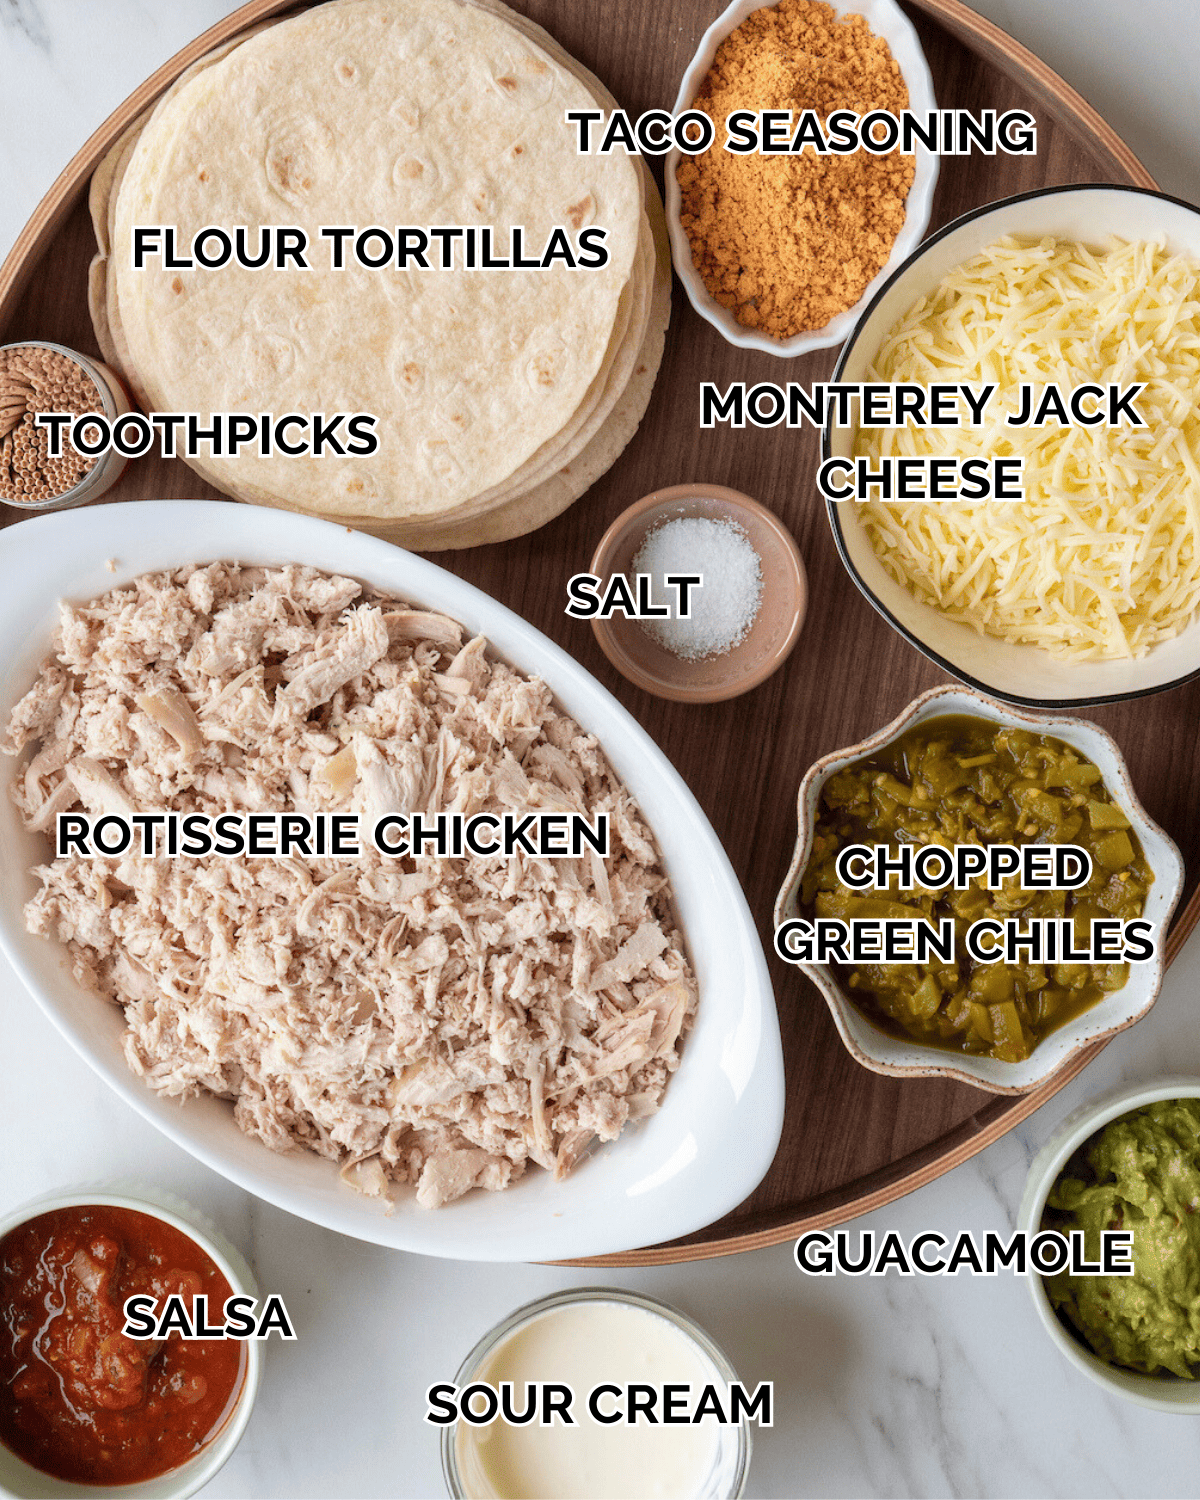 Mise-en-place with all the ingredients required to make chicken flautas.